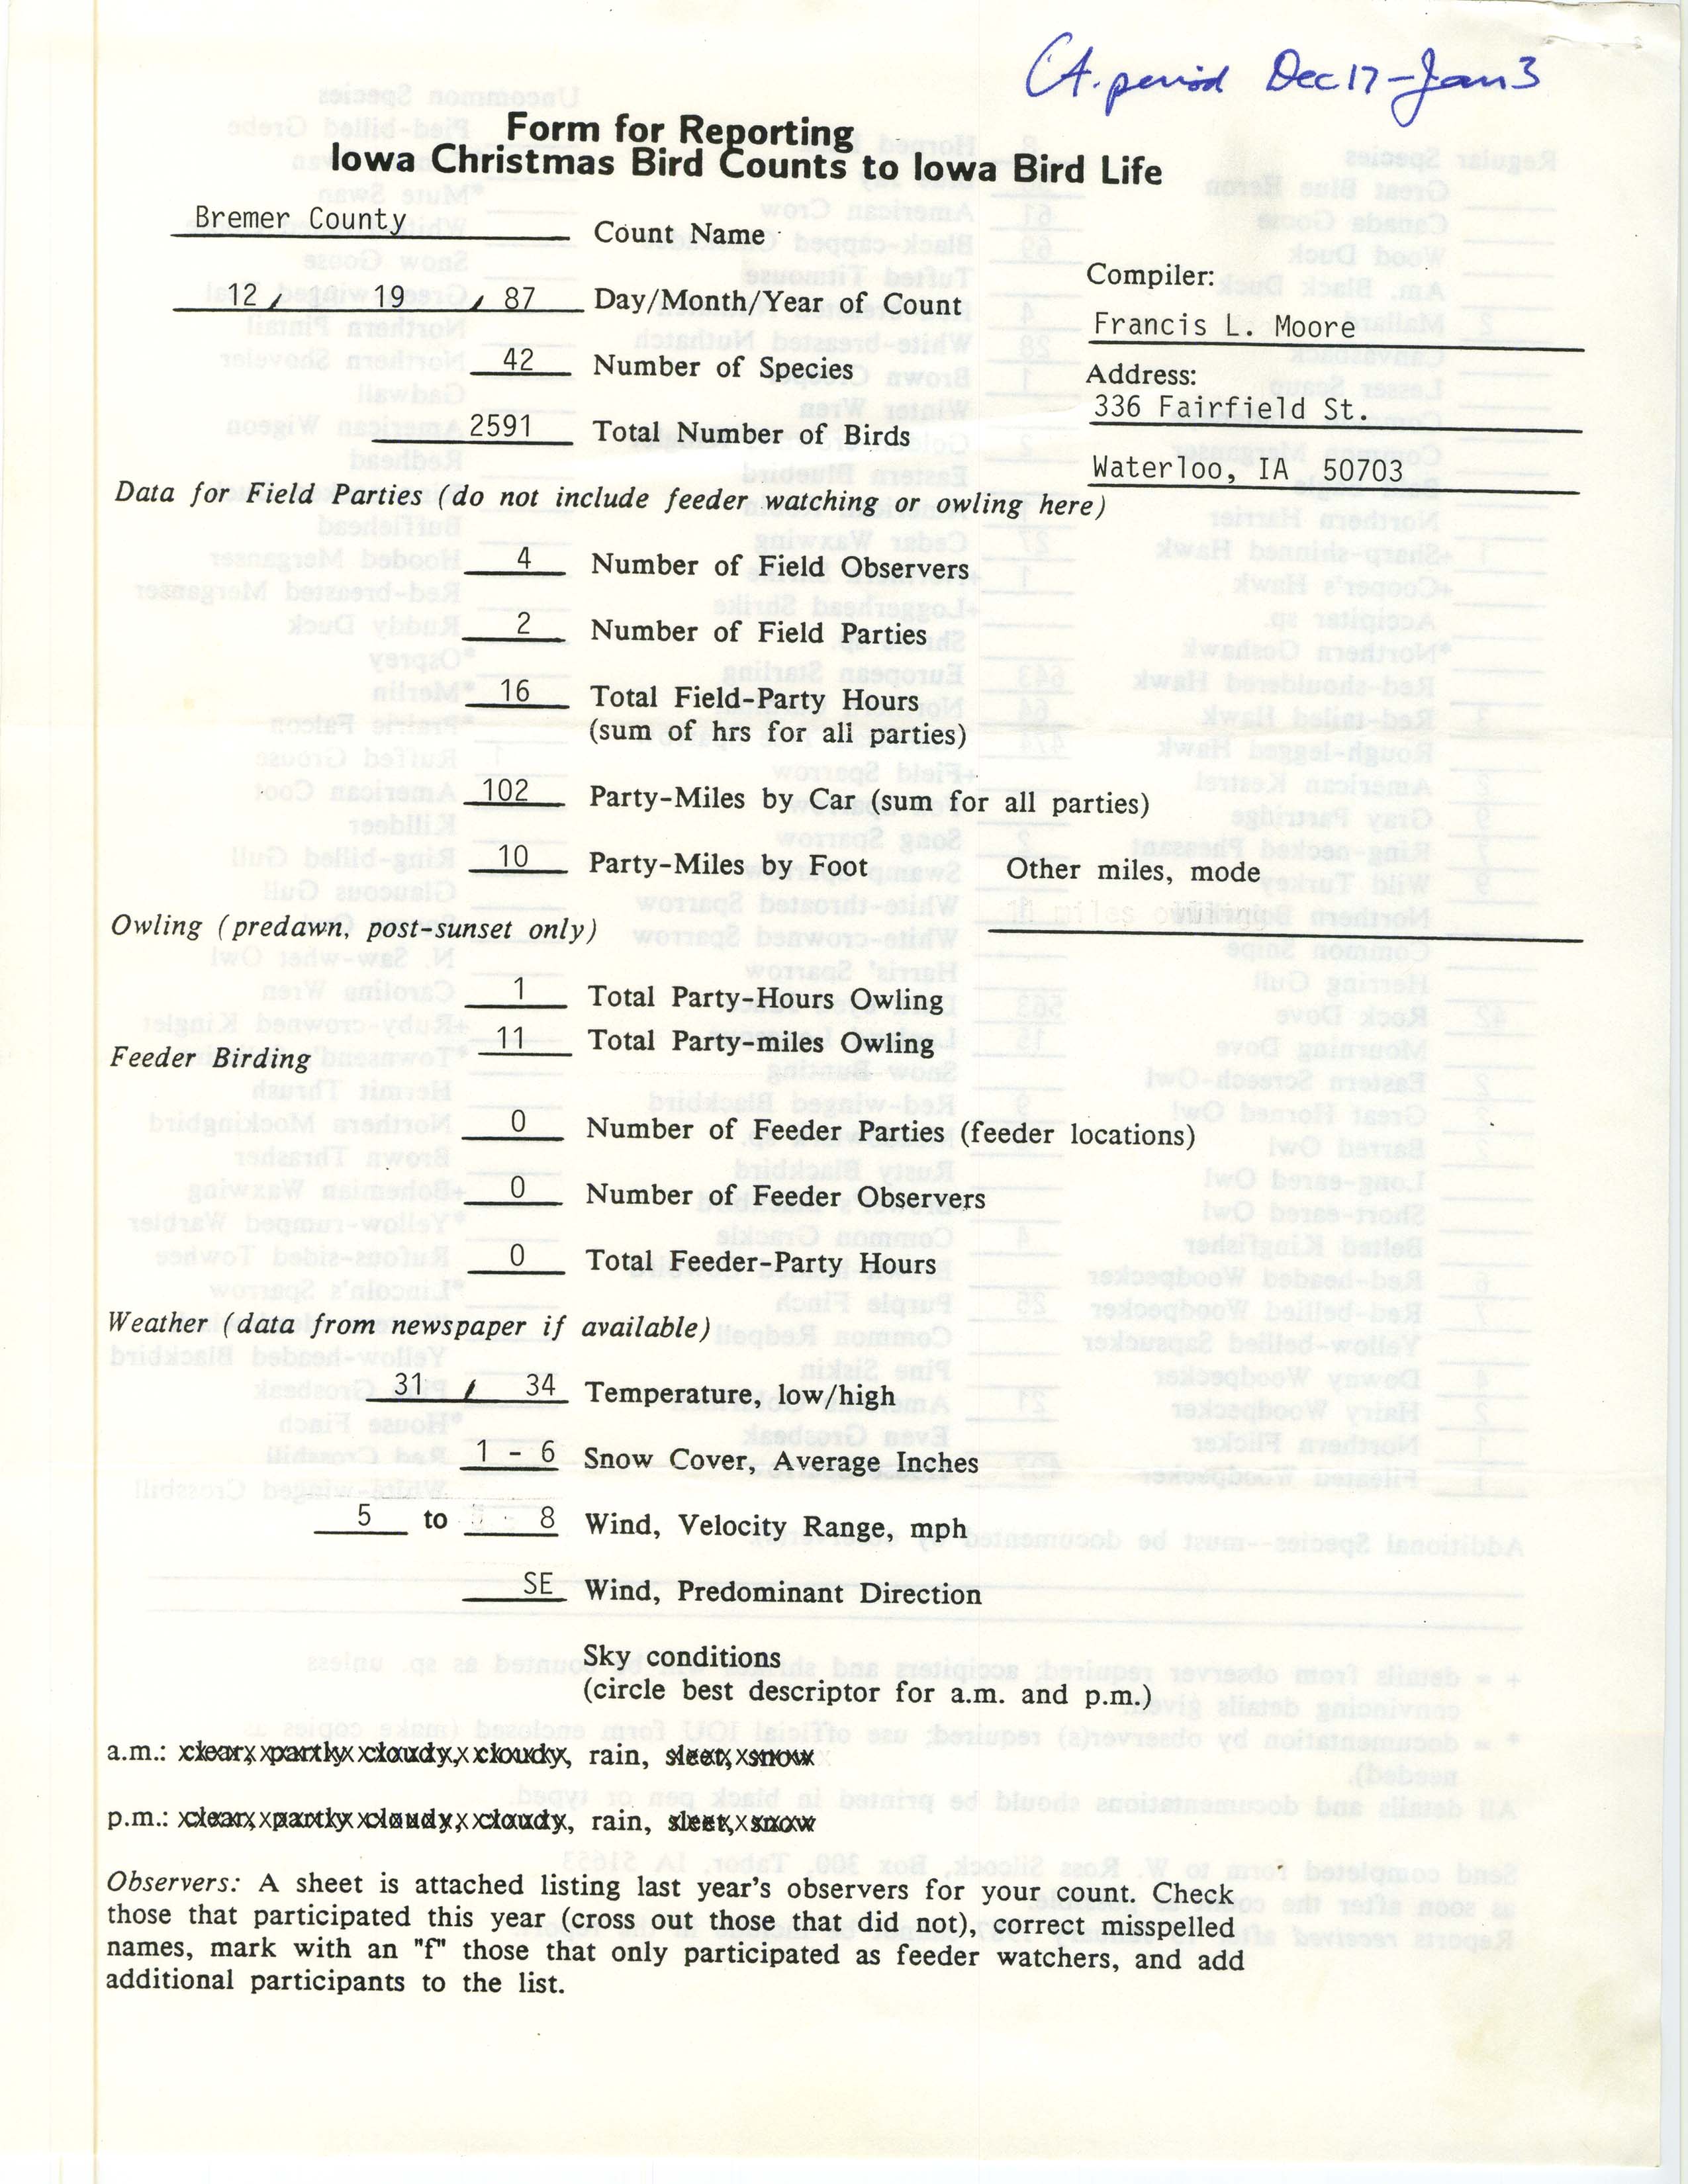 Form for reporting Iowa Christmas bird counts to Iowa Bird Life, Francis L. Moore, December 19, 1987